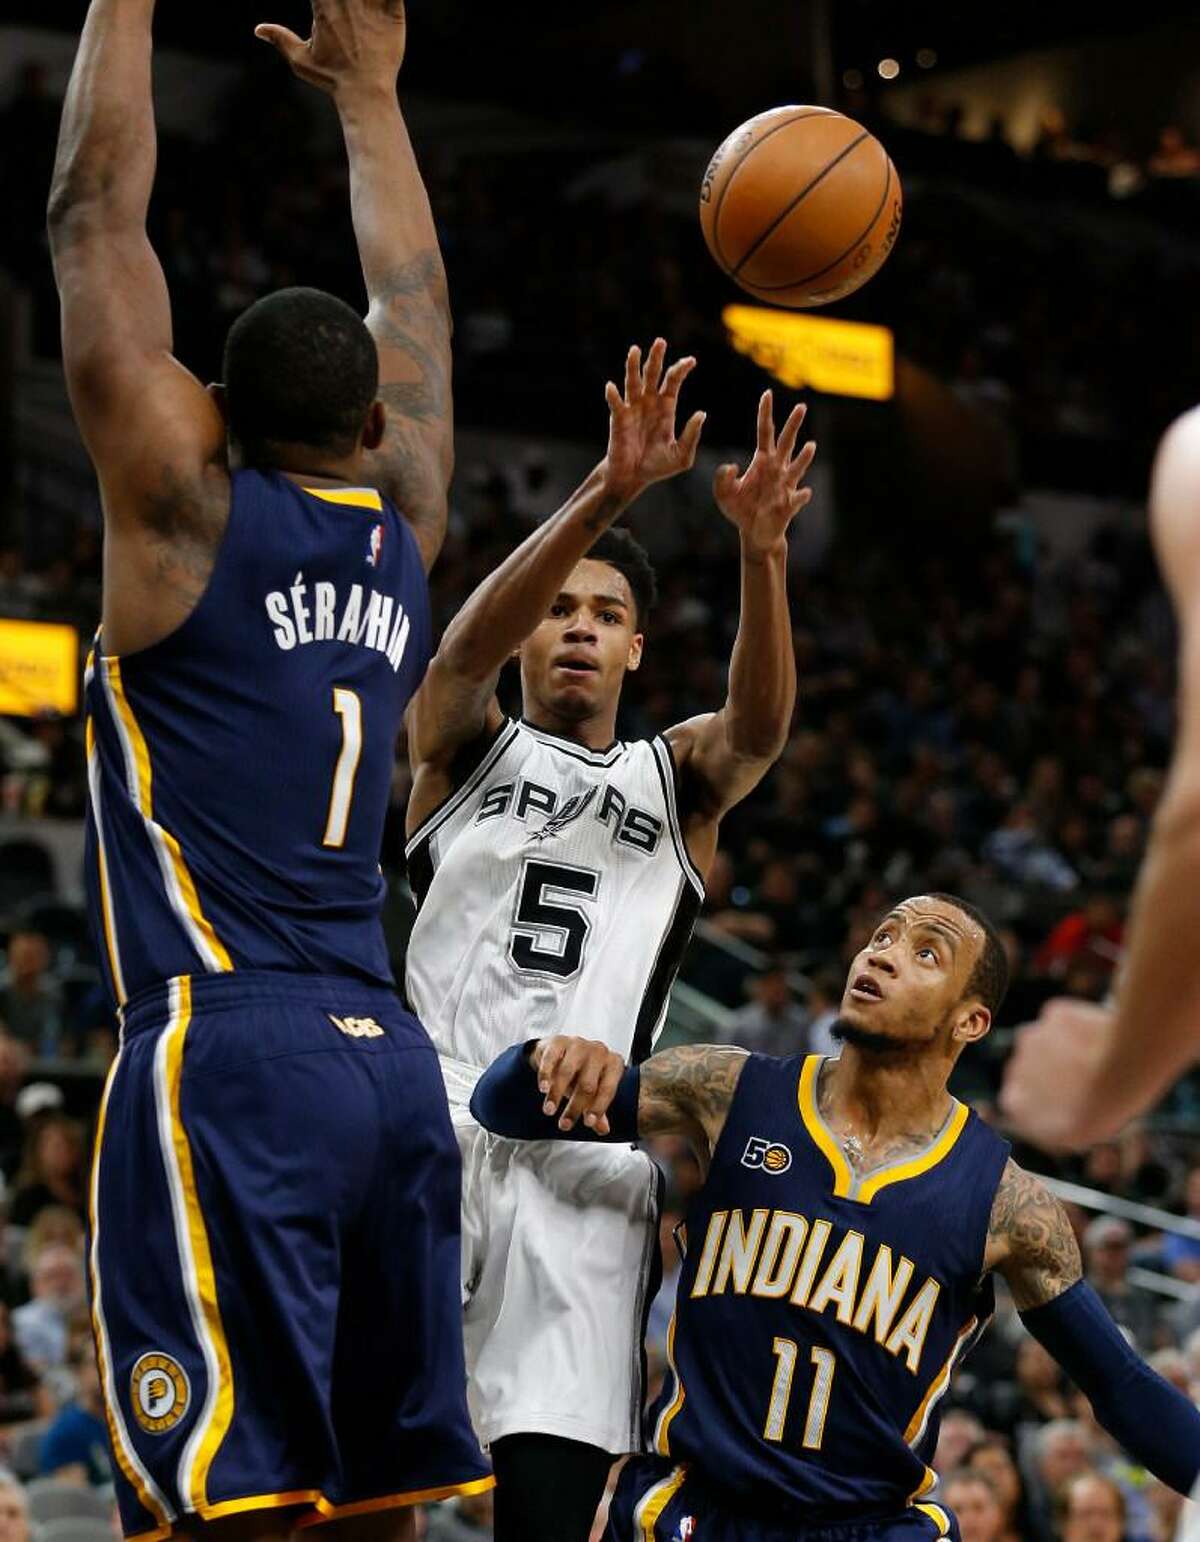 Dejounte Murray makes a pass between Indiana Pacers’ Kevin Seraphin (01) and Monta Ellis (11) during their game at the AT&T Center on Wednesday, Mar. 1, 2017. The Spurs defeated the Pacers, 100-99.